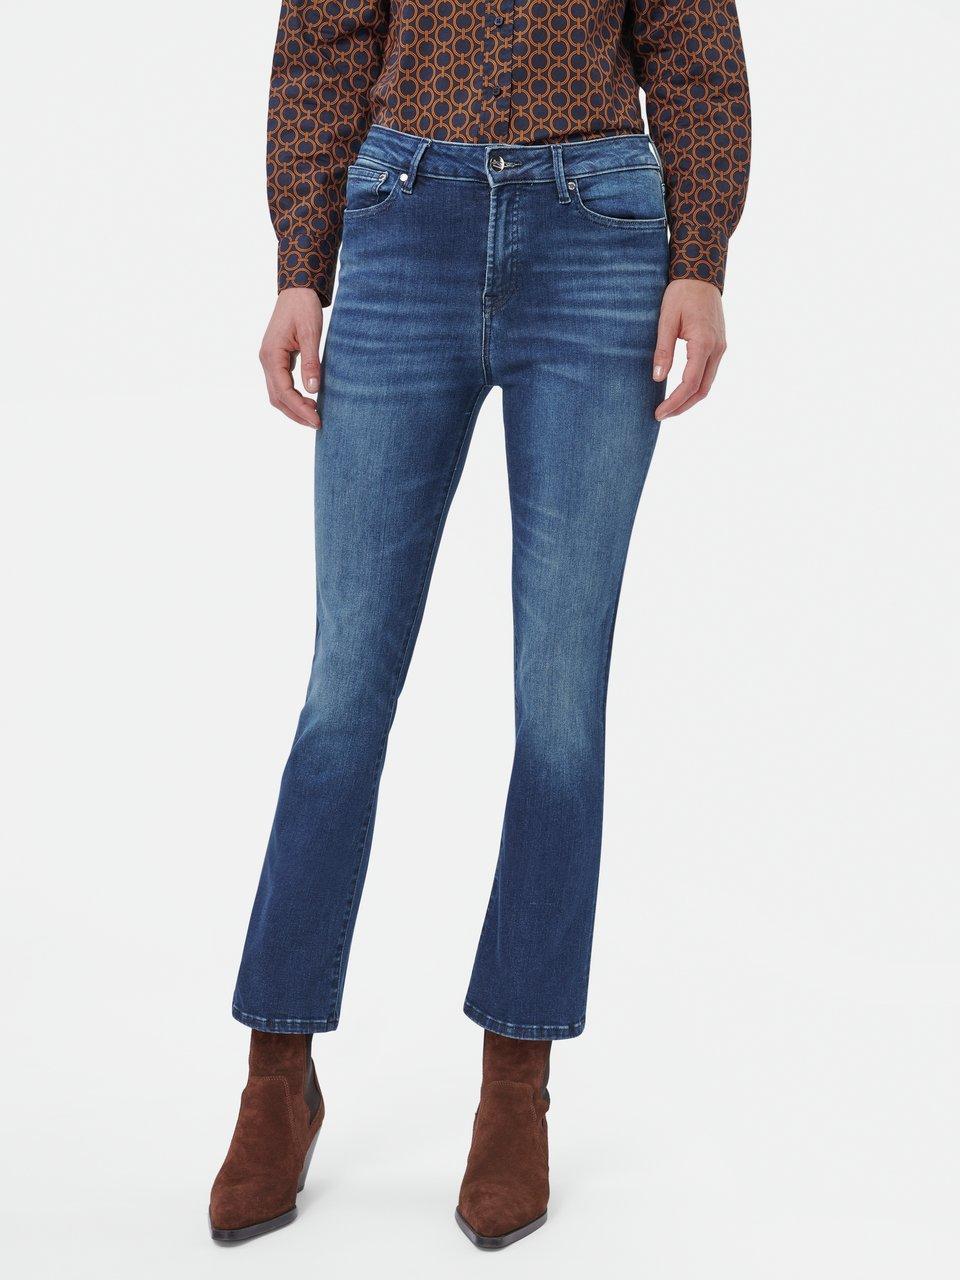 Denham - Jeans 'Brittany Bootcut' in inchlengte 28